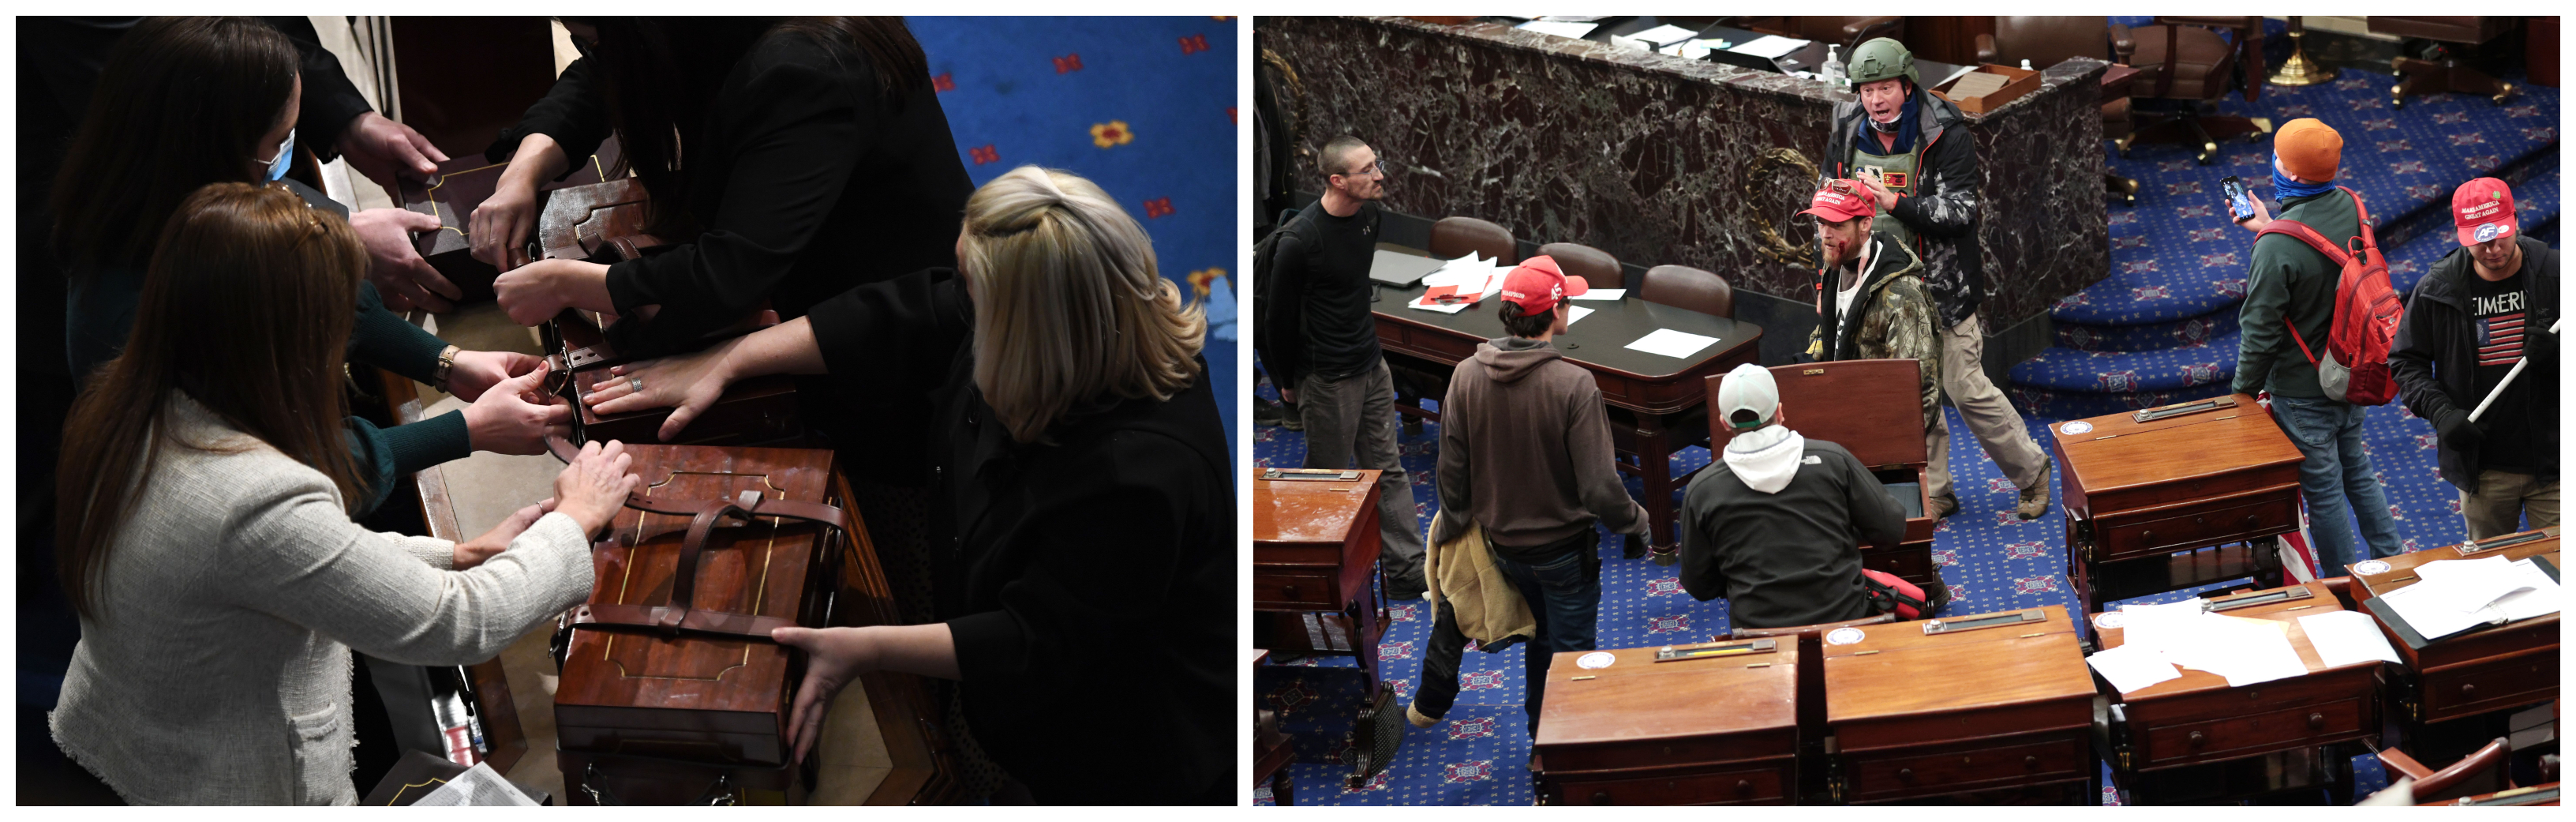 Side by side images of aides opening the cases that hold the electoral college votes after the session resumed in the evening and of insurrectionists waking around on the floor of the House camber.